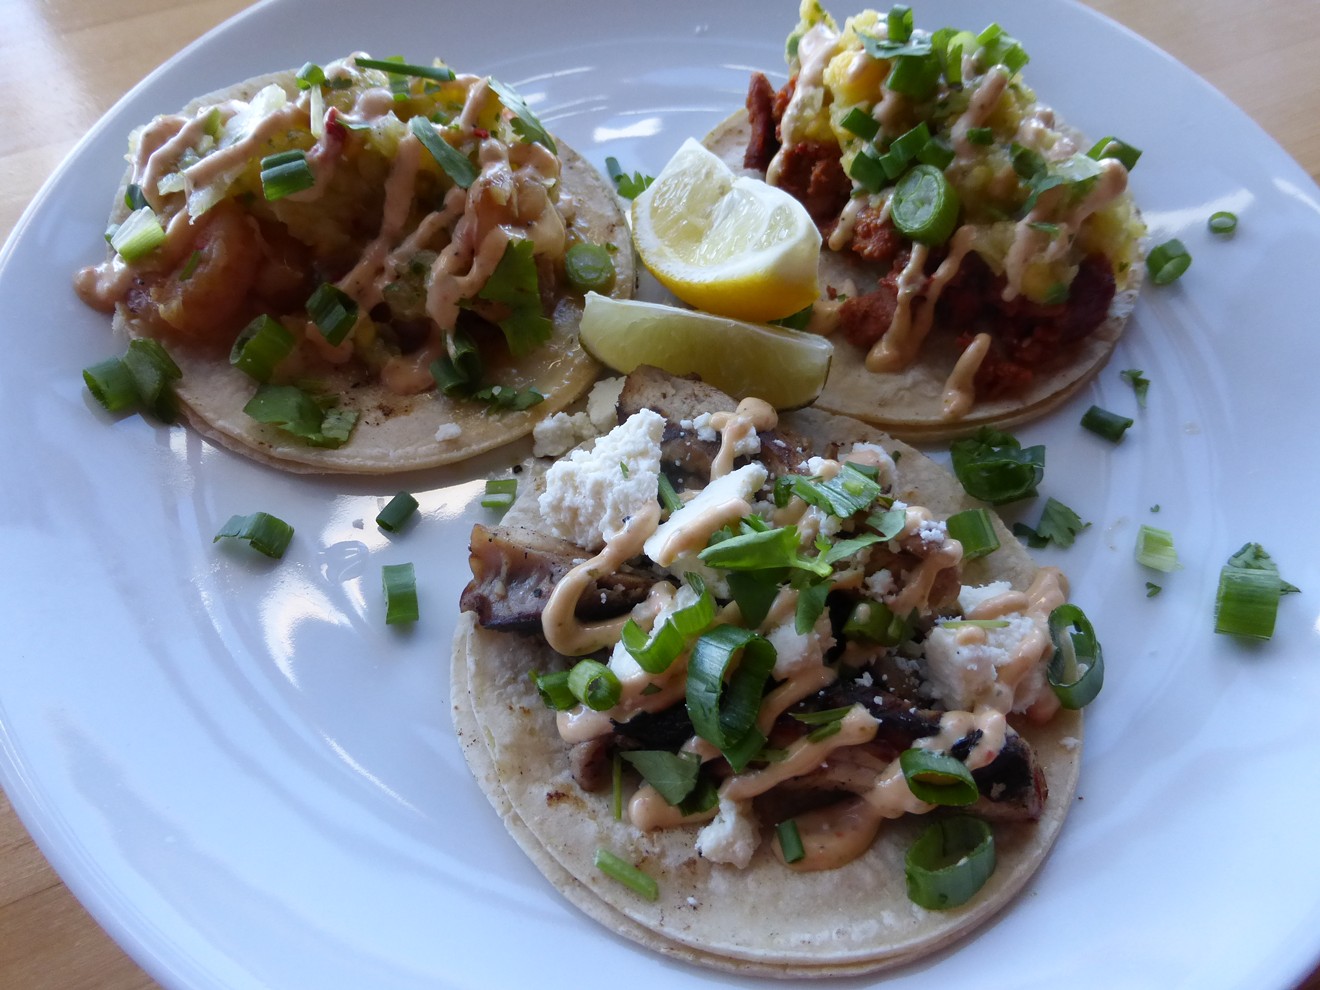 Hawaiian tacos aren't a common sight on the islands, but they're popular sellers at Ohana Grille.